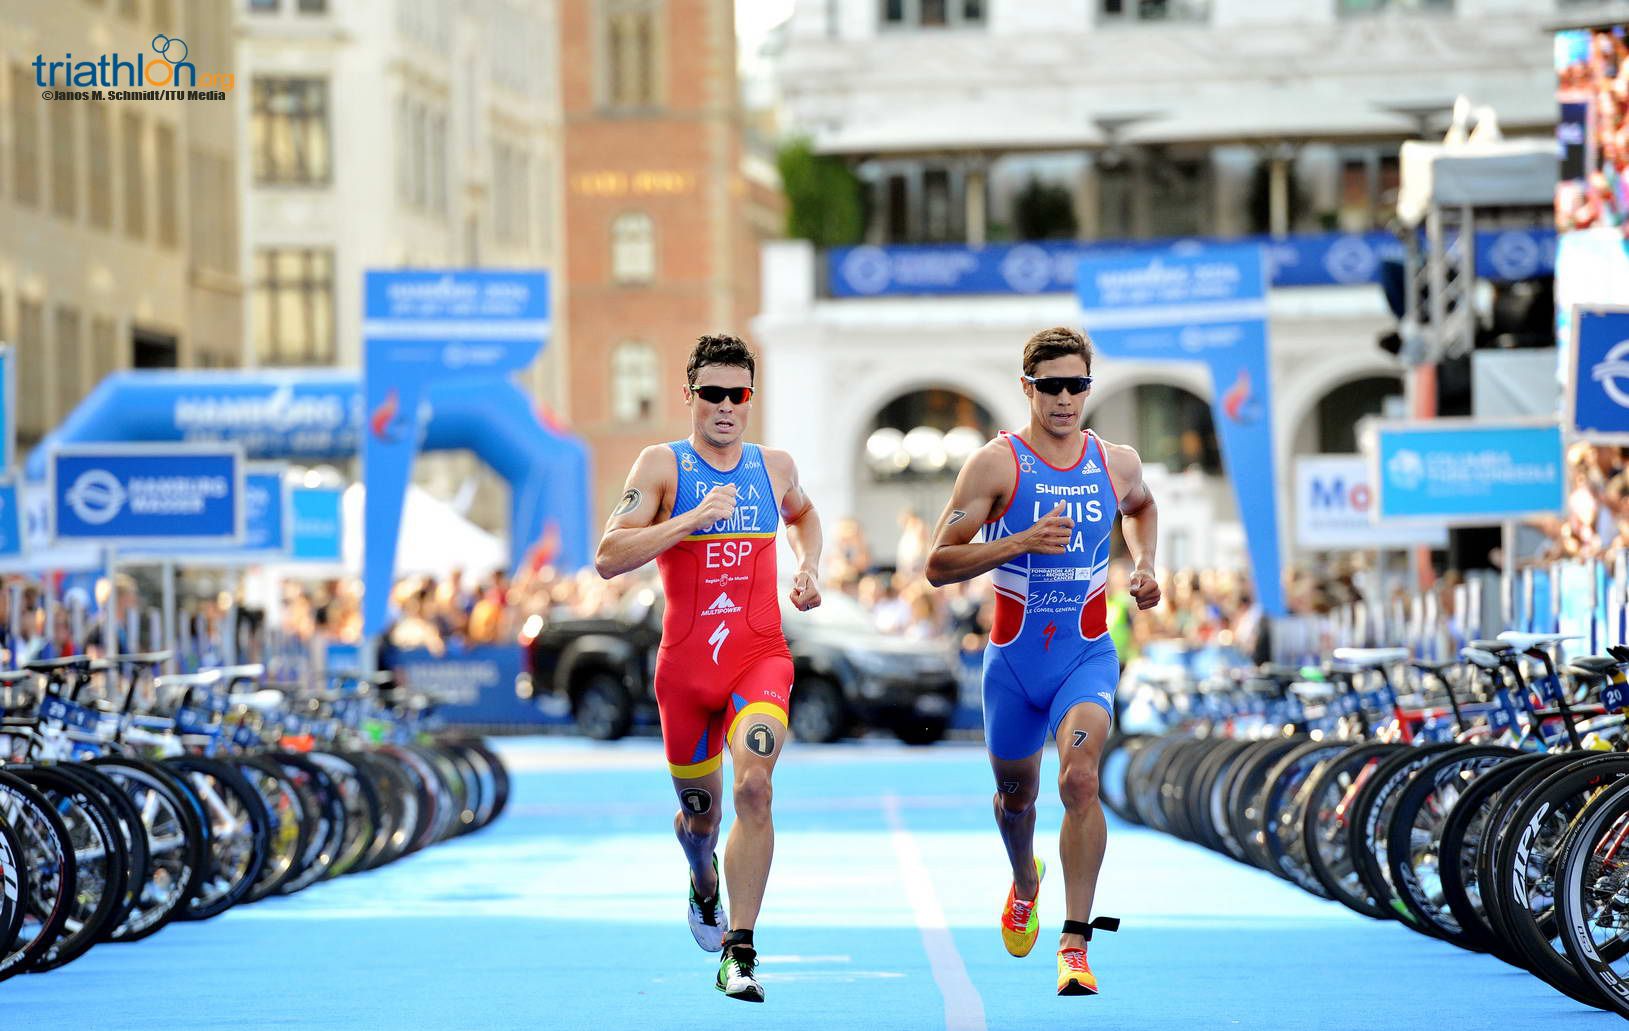 Vincent out sprints World Champion to win first World Triathlon Series race